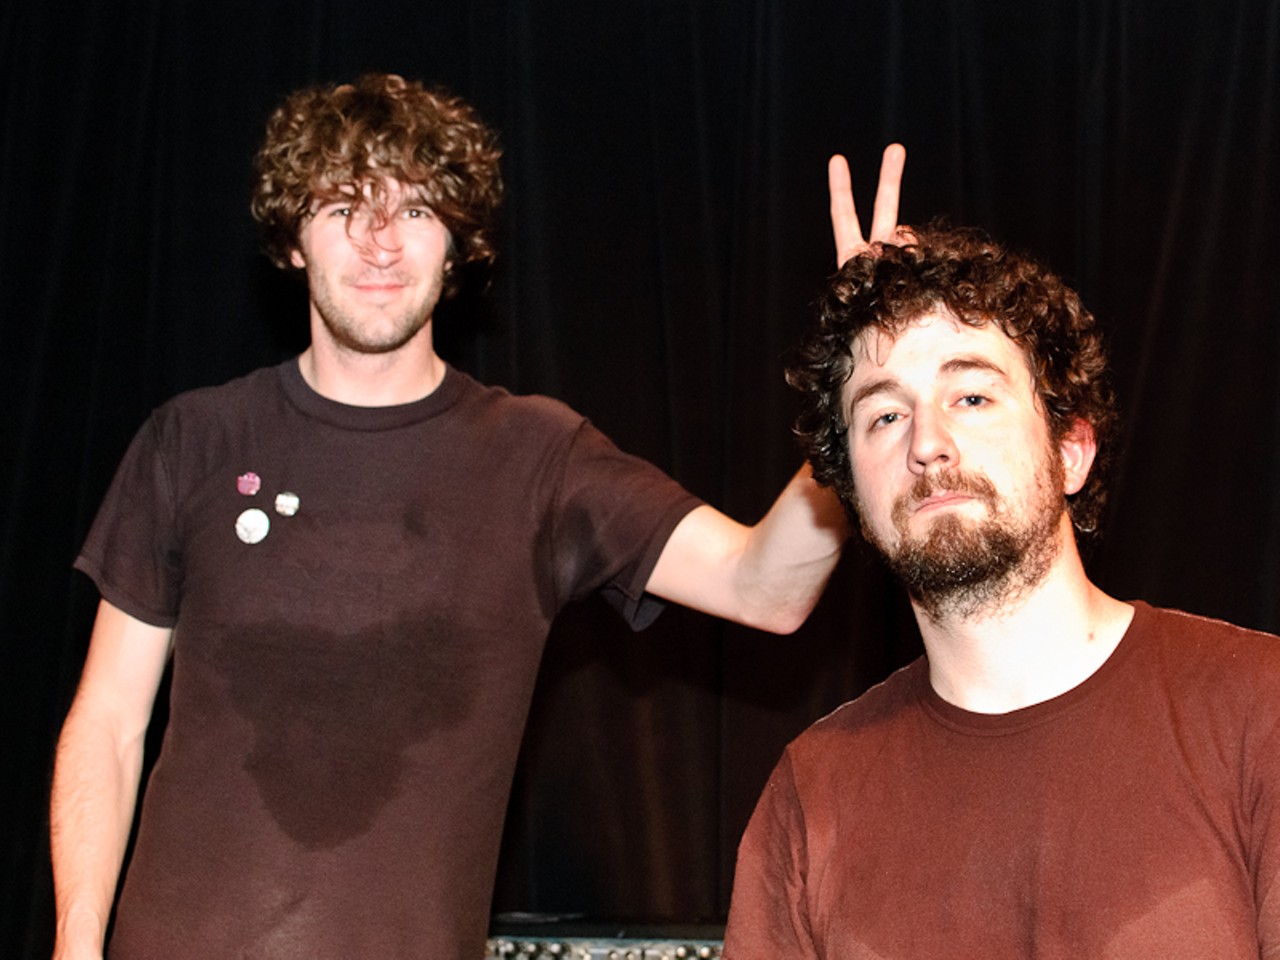 Brian King and David Prowse of Japandroids, post-rocking.